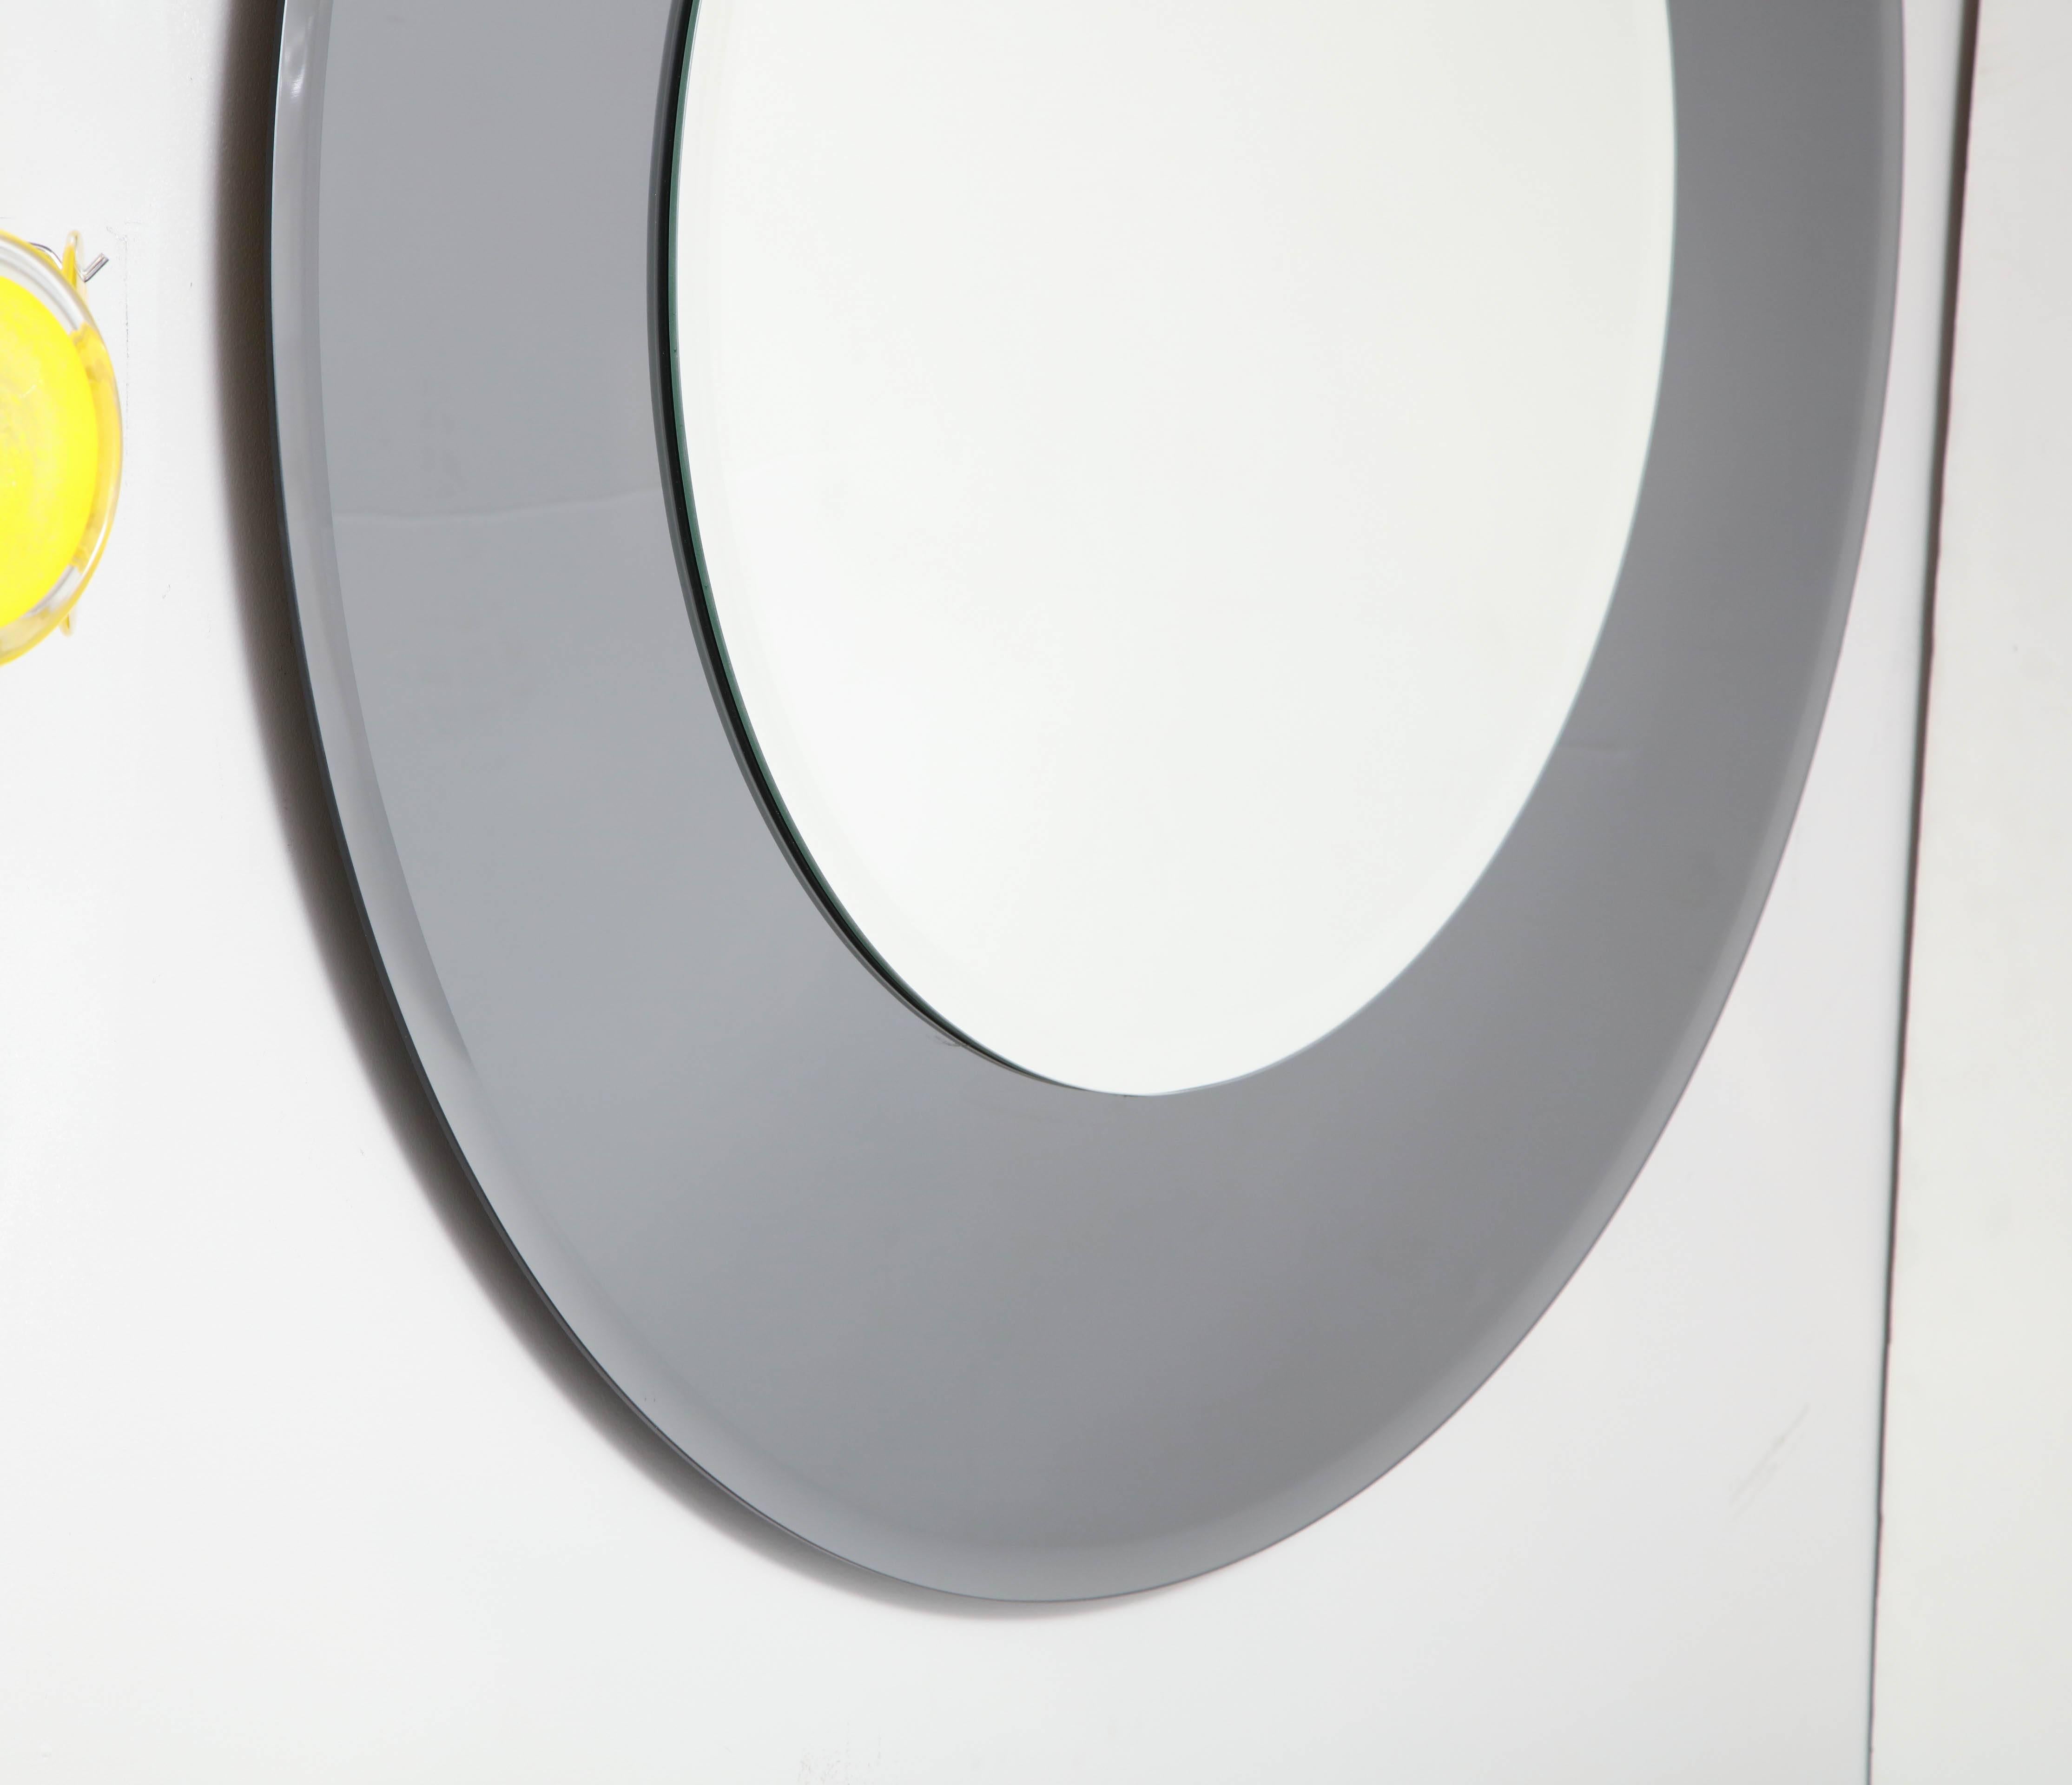 Custom large beveled edge round mirror with smoke glass border. The center mirror is 30